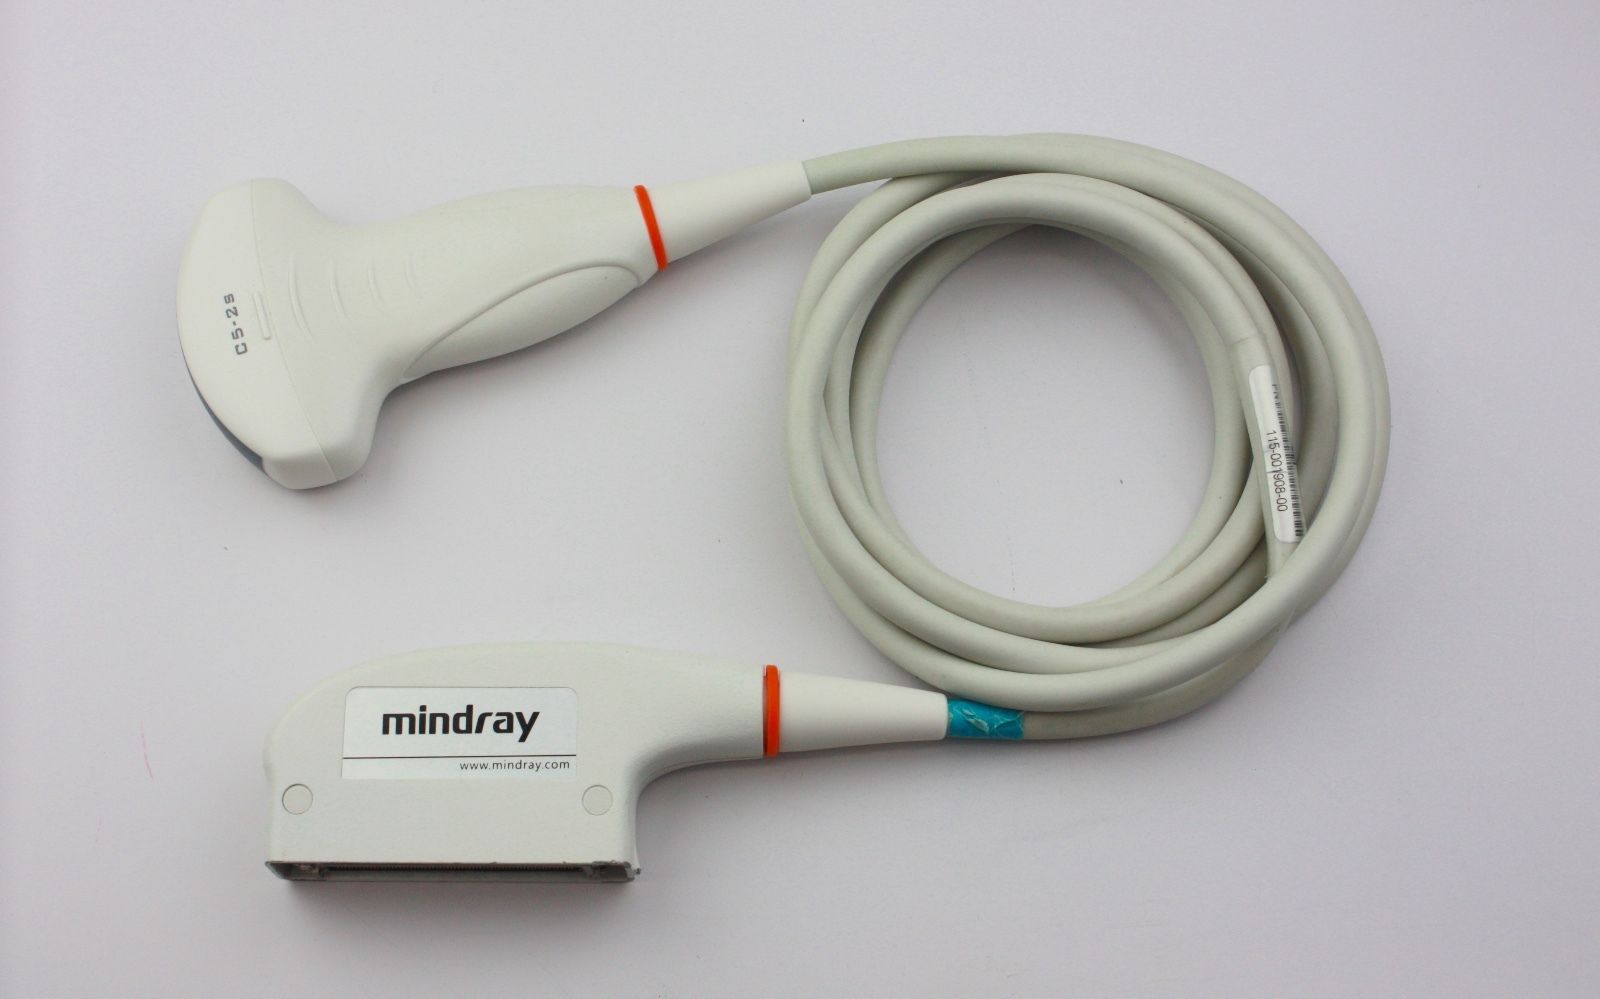 C5-2s Convex Array Transducer Probe, 2-5MHz, for Mindray Ultrasound DIAGNOSTIC ULTRASOUND MACHINES FOR SALE